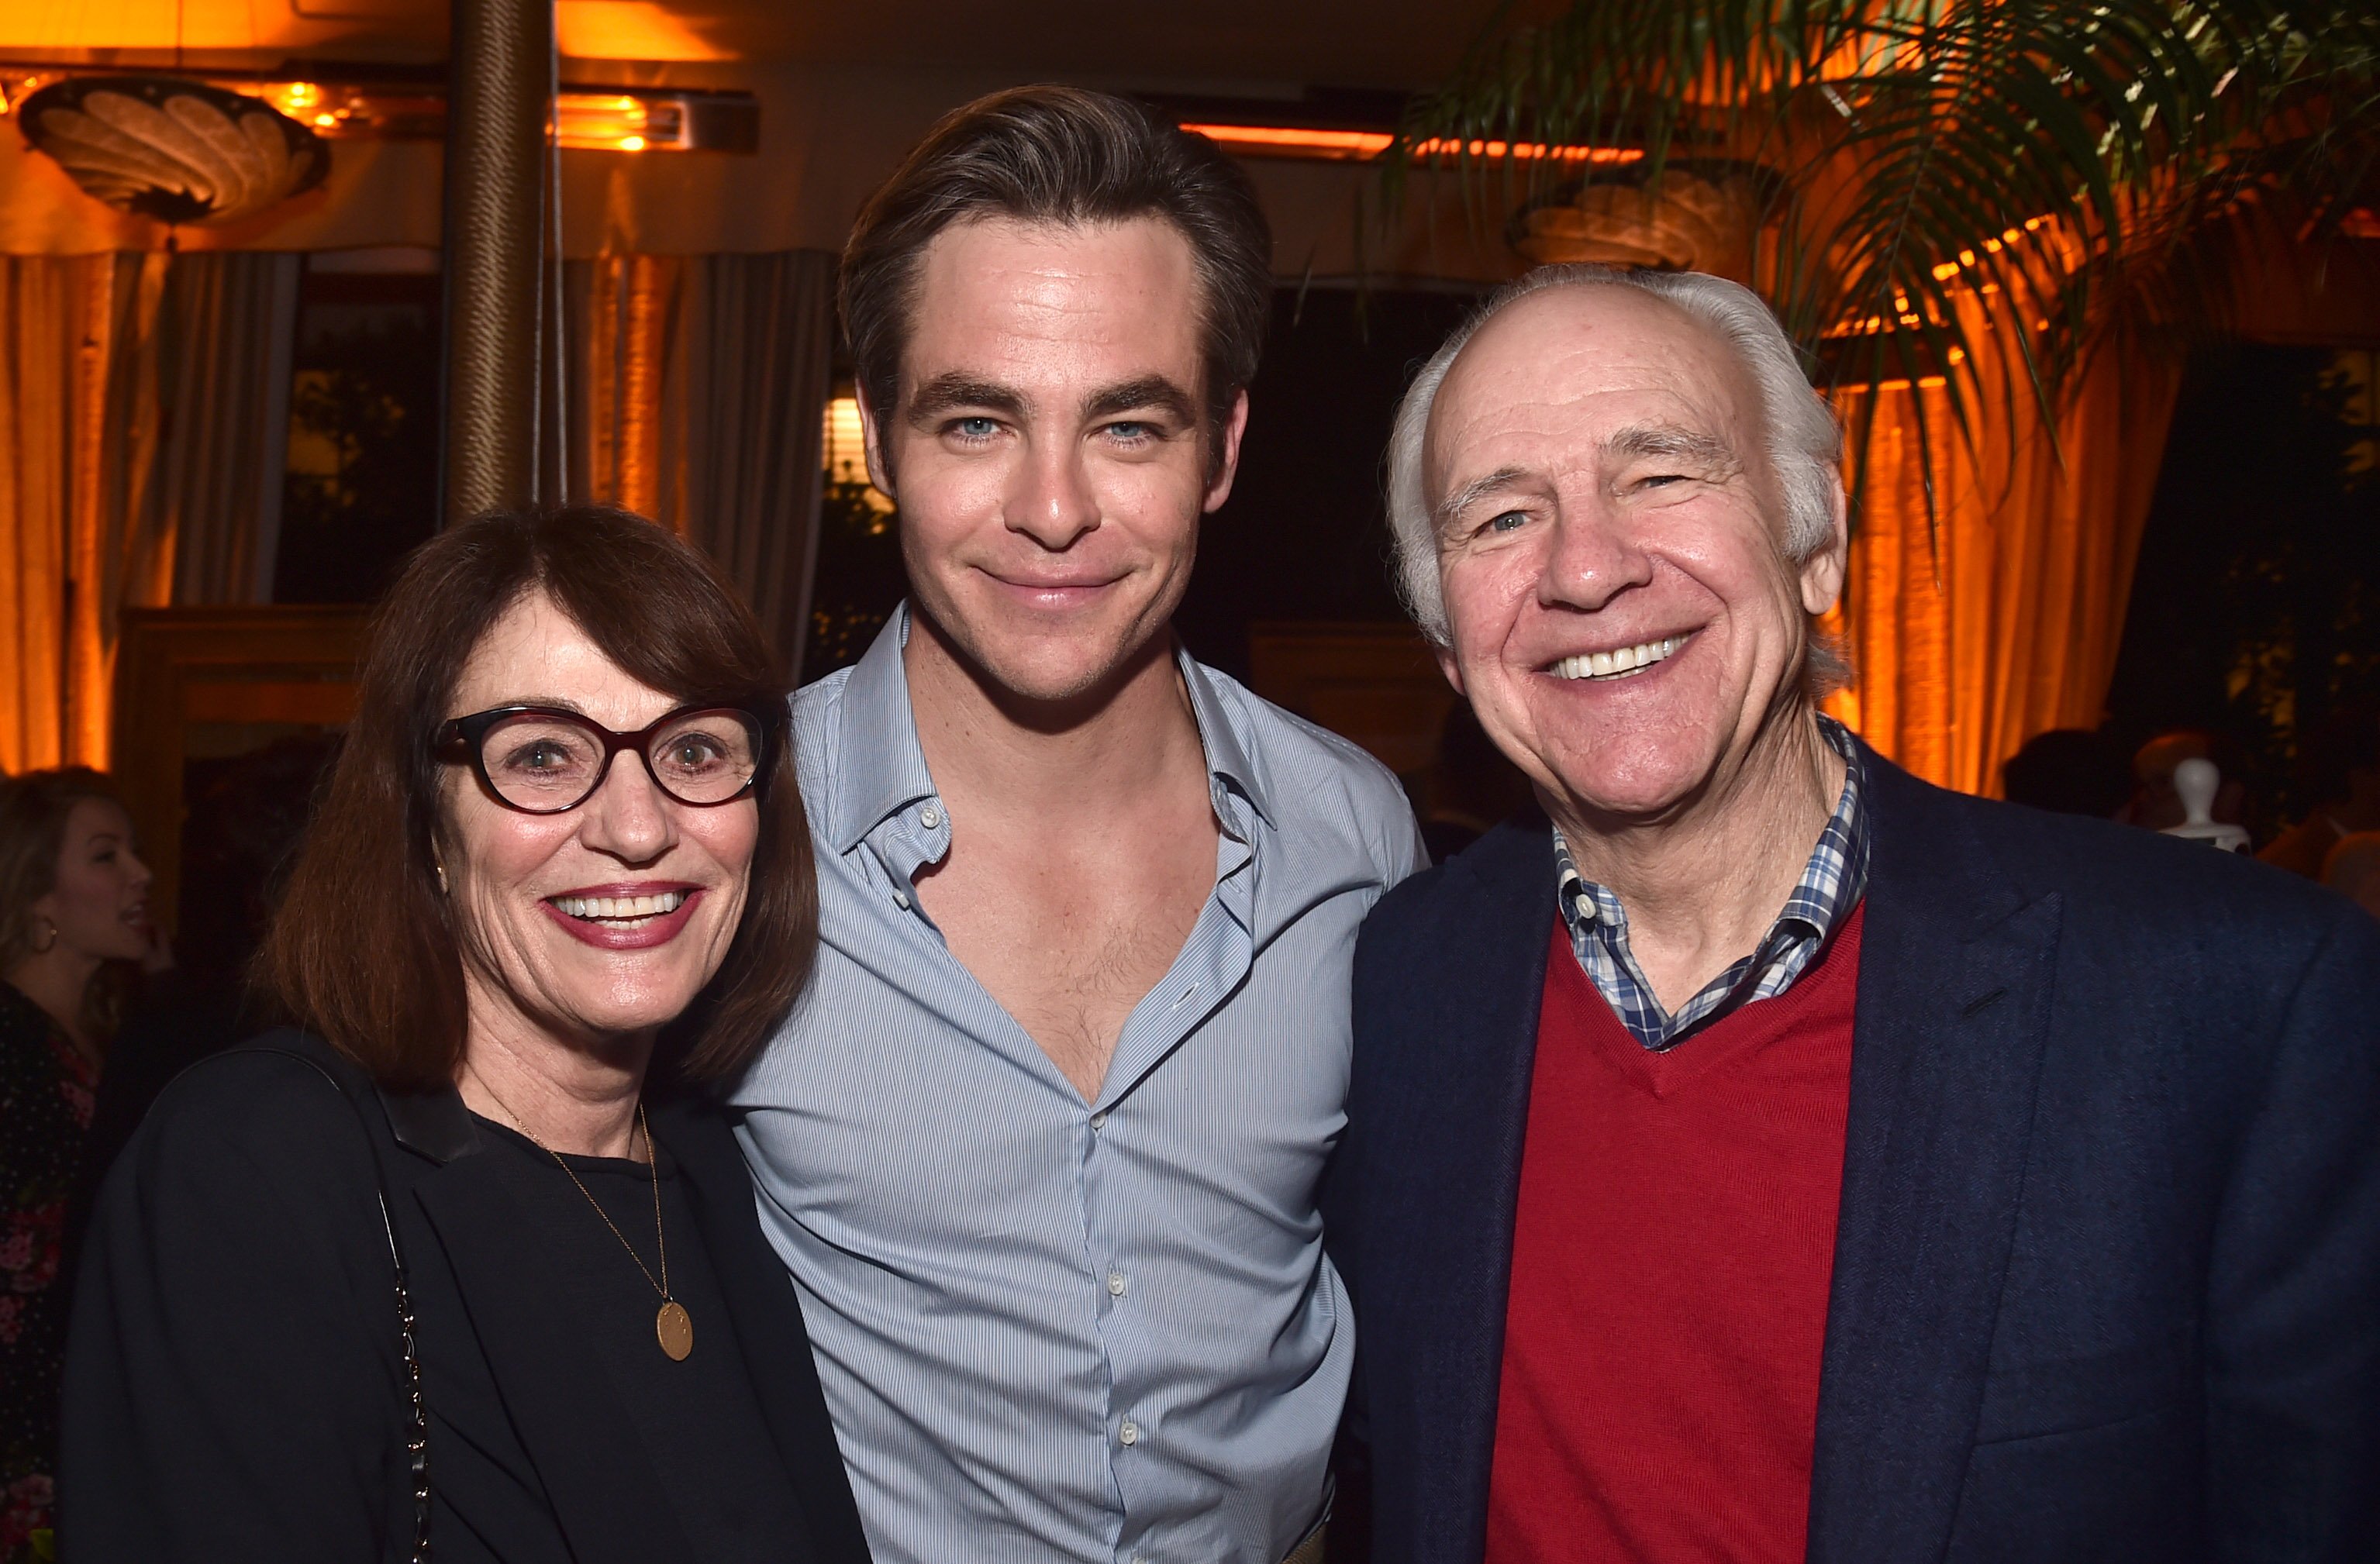 Gwynne Gilford, Chris Pine and Robert Pine attend the after party for the premiere of TNT's "I Am The Night" on January 24, 2019 in Los Angeles, California.| Source: Getty Images